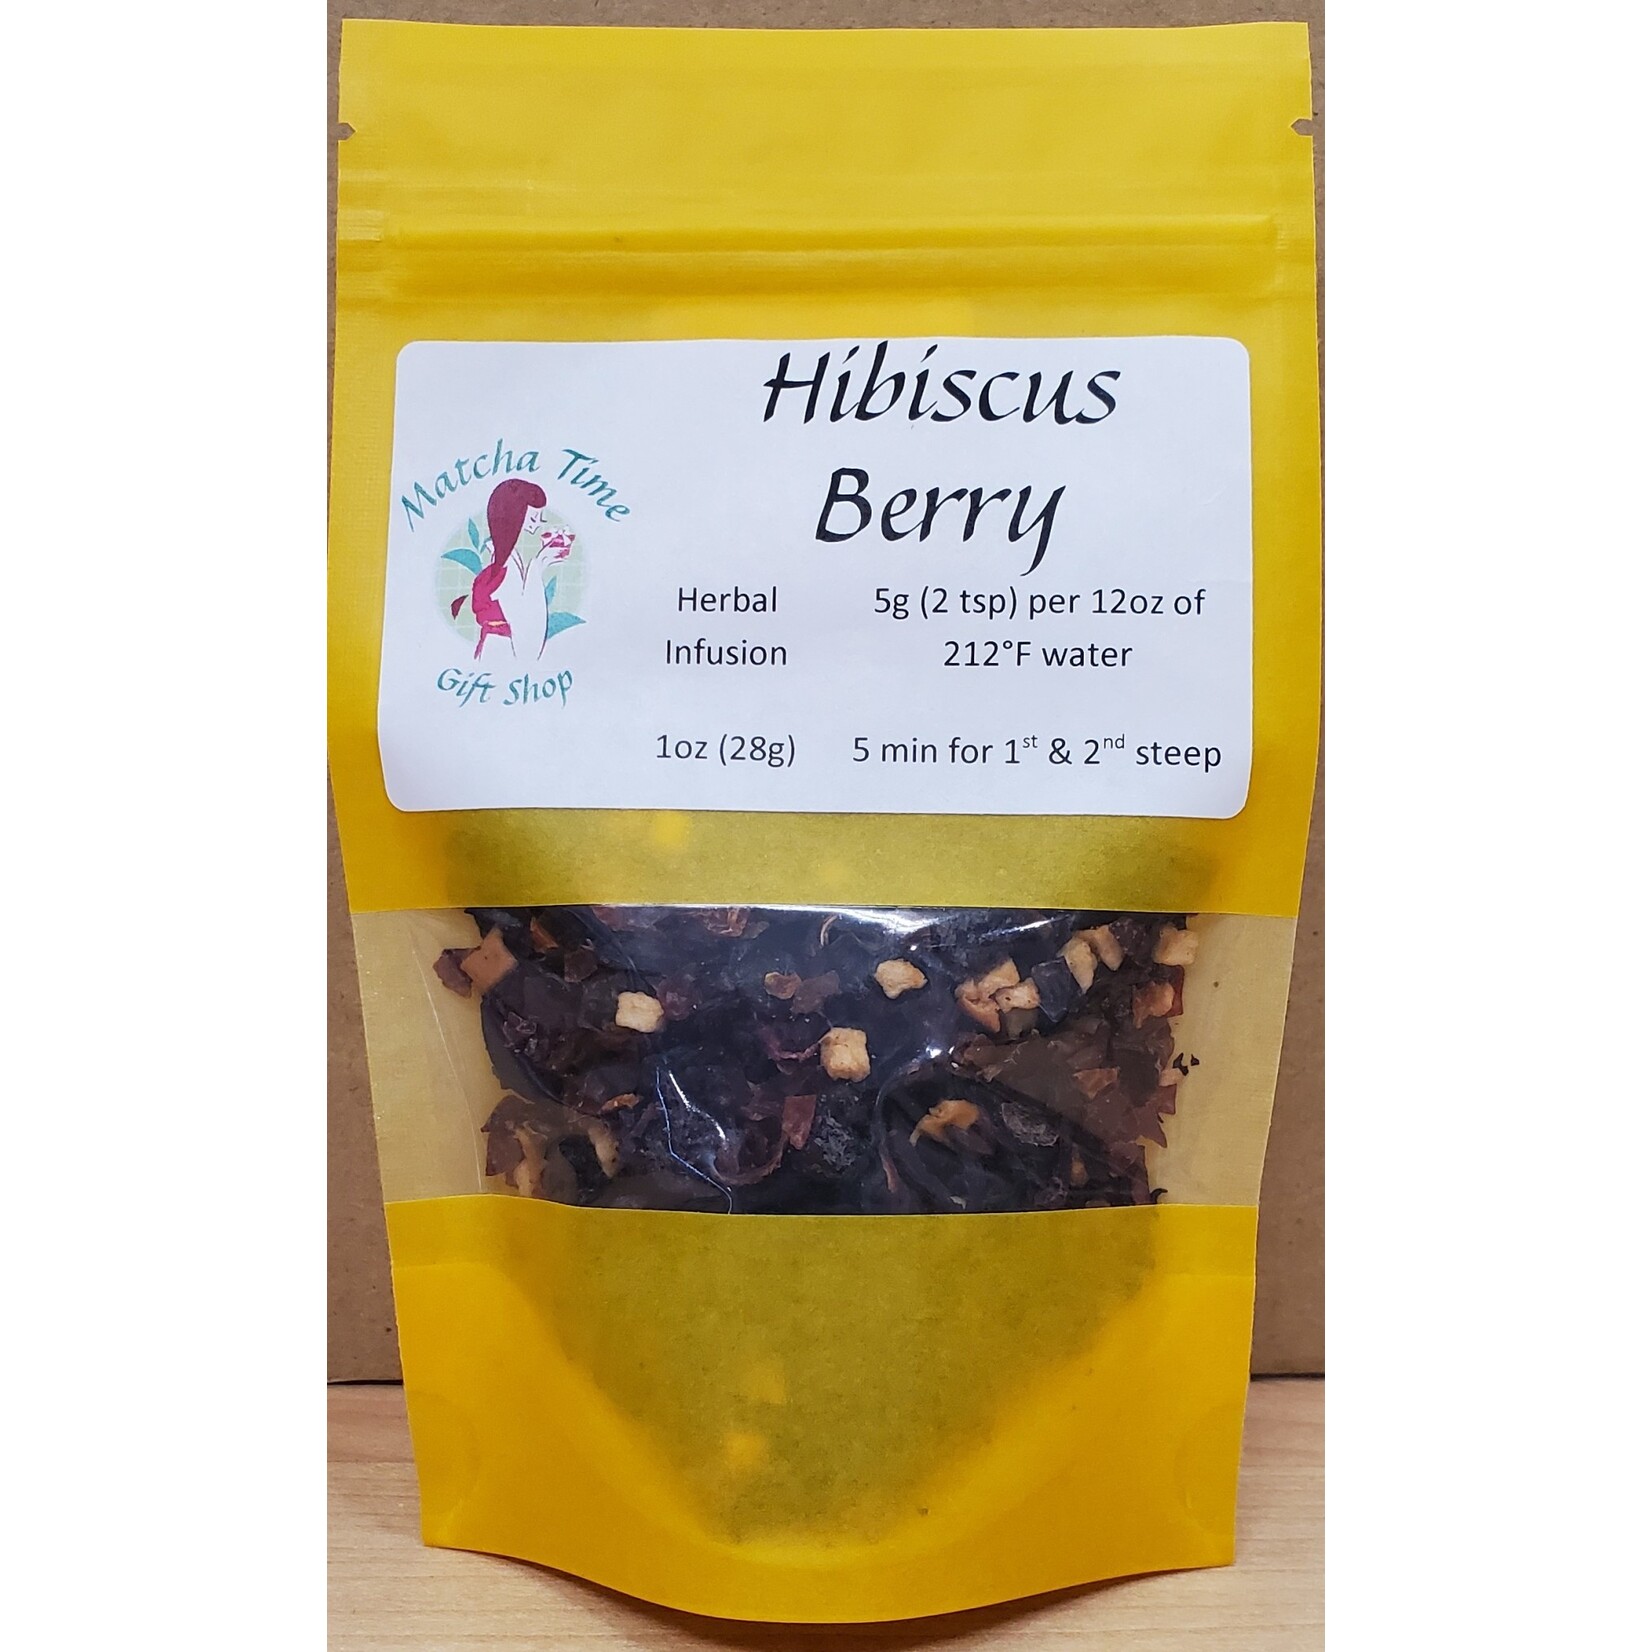 Matcha Time Cafe Hibiscus Berry Herbal Infusion - Loose Leaf Bag